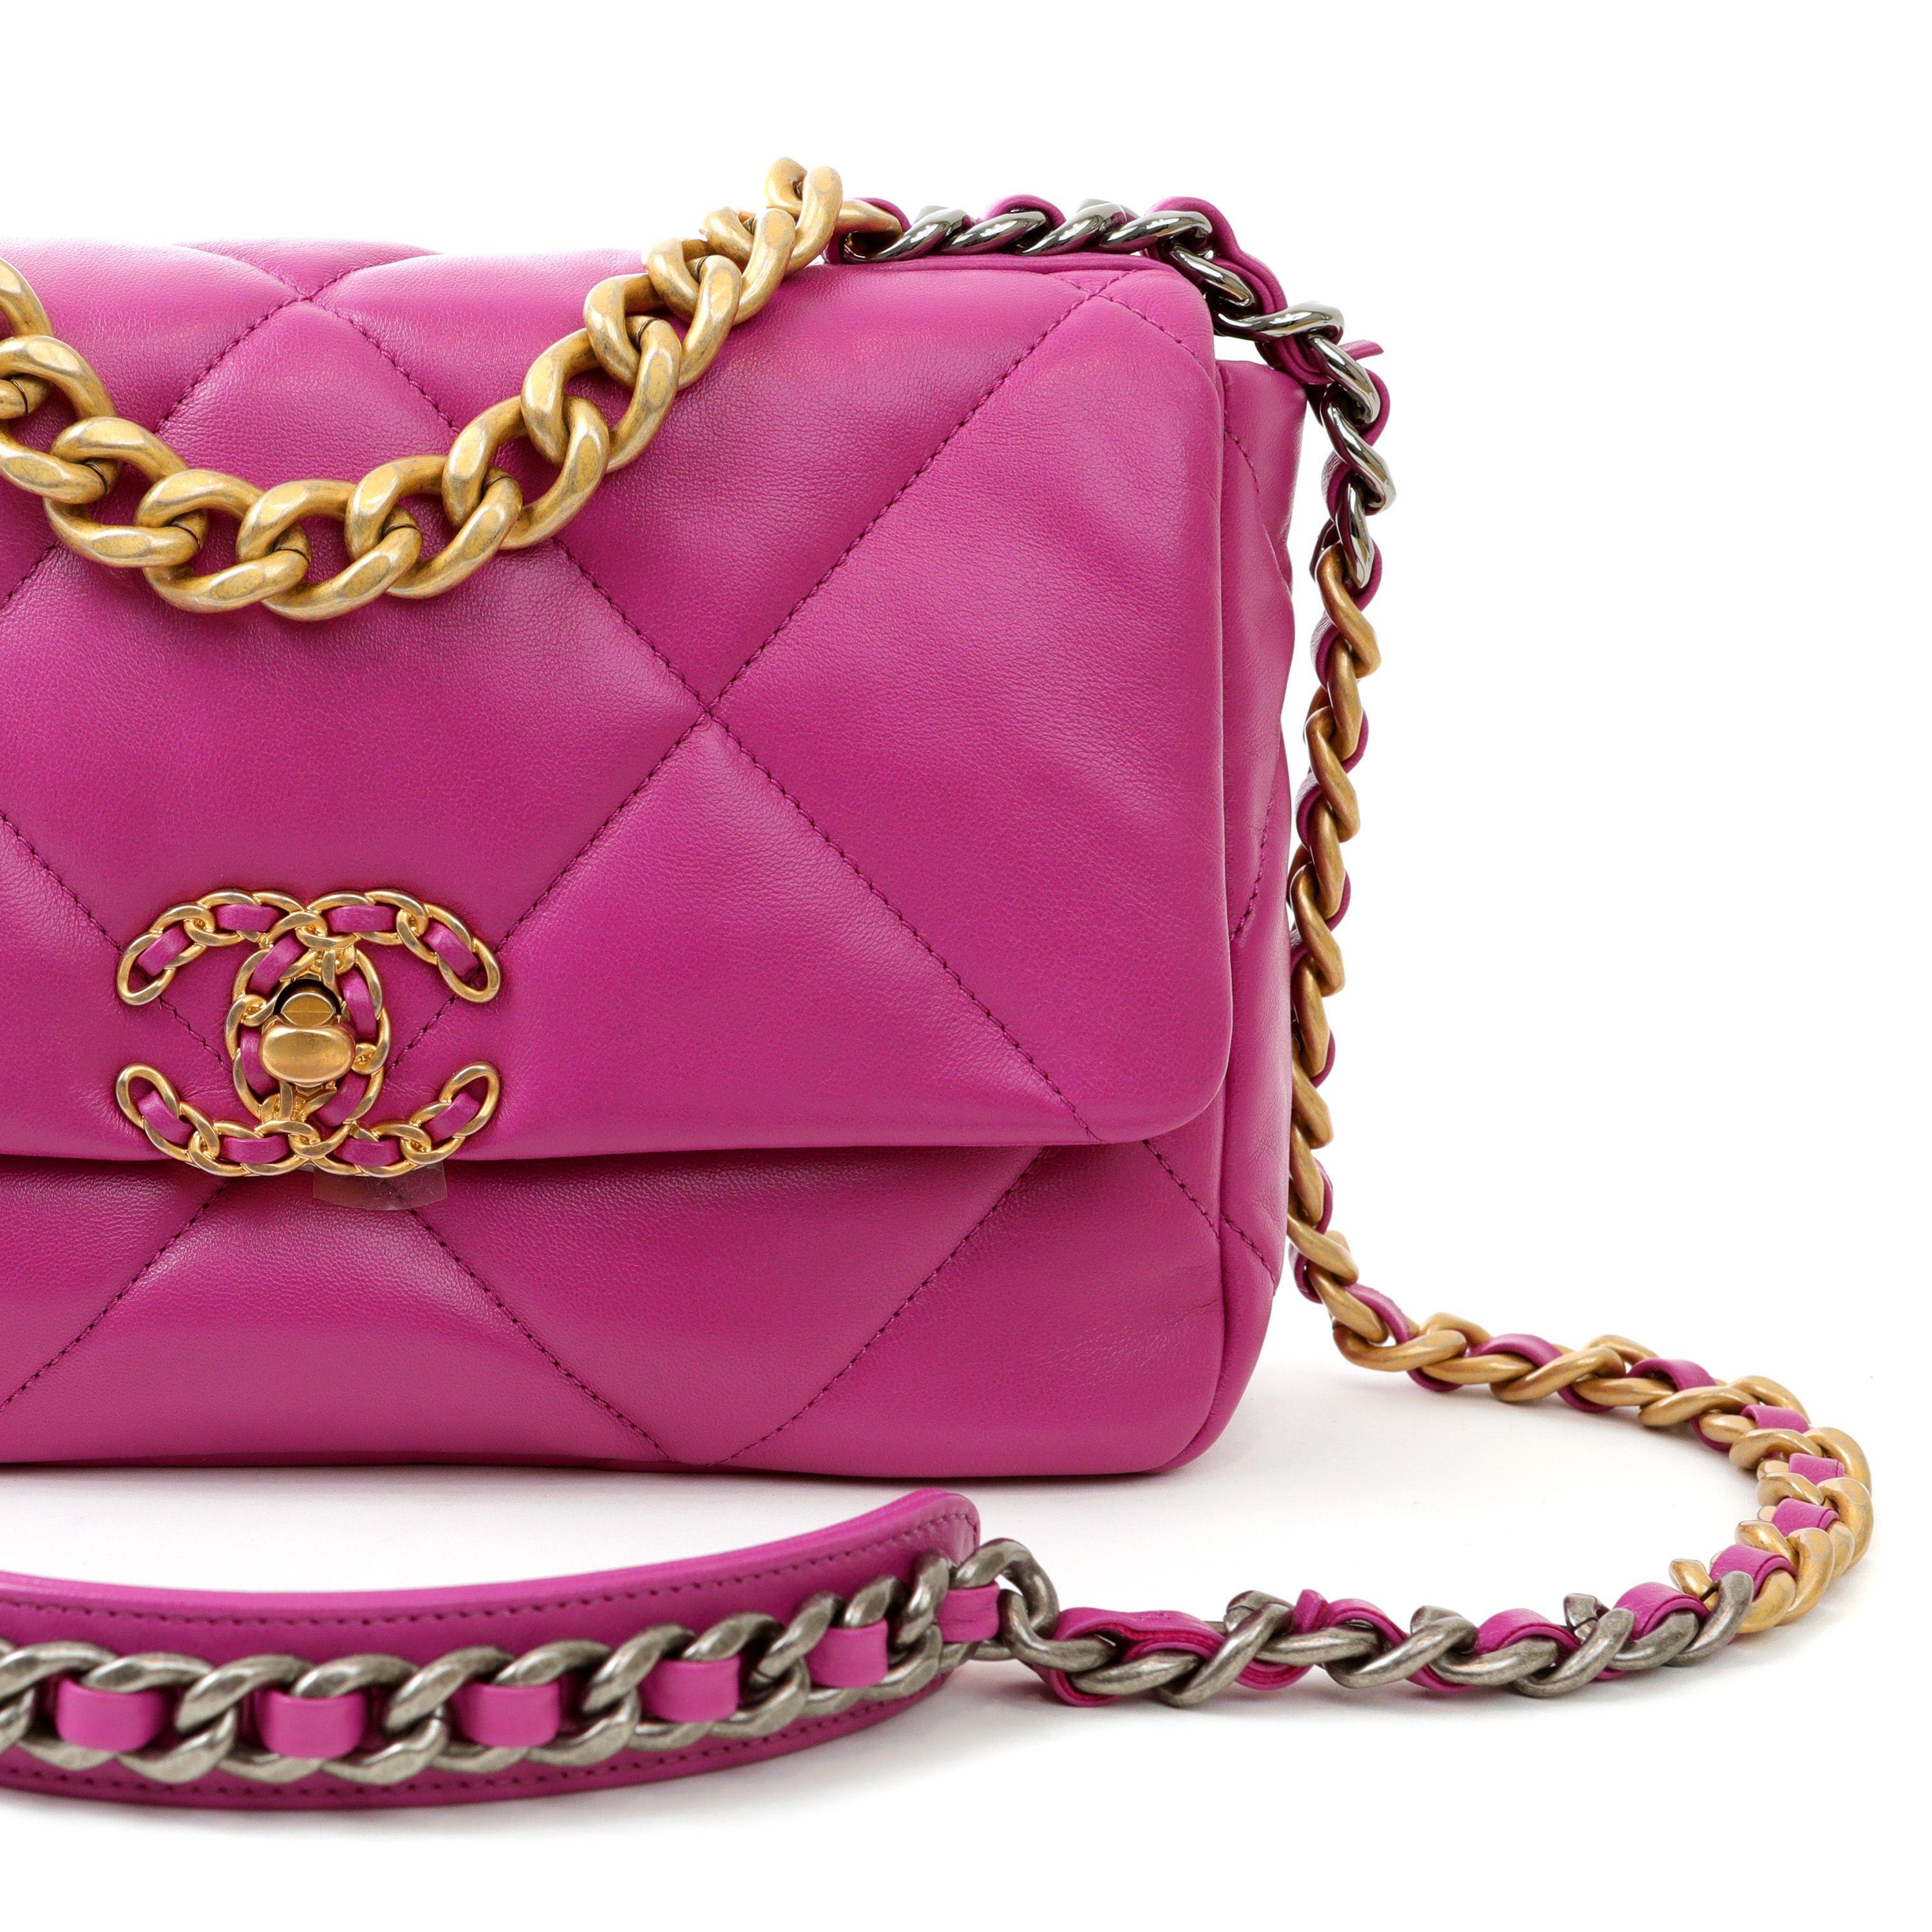 Chanel Bright Purple Lambskin Small 19 Bag with Mixed metal Hardware In Excellent Condition For Sale In Palm Beach, FL